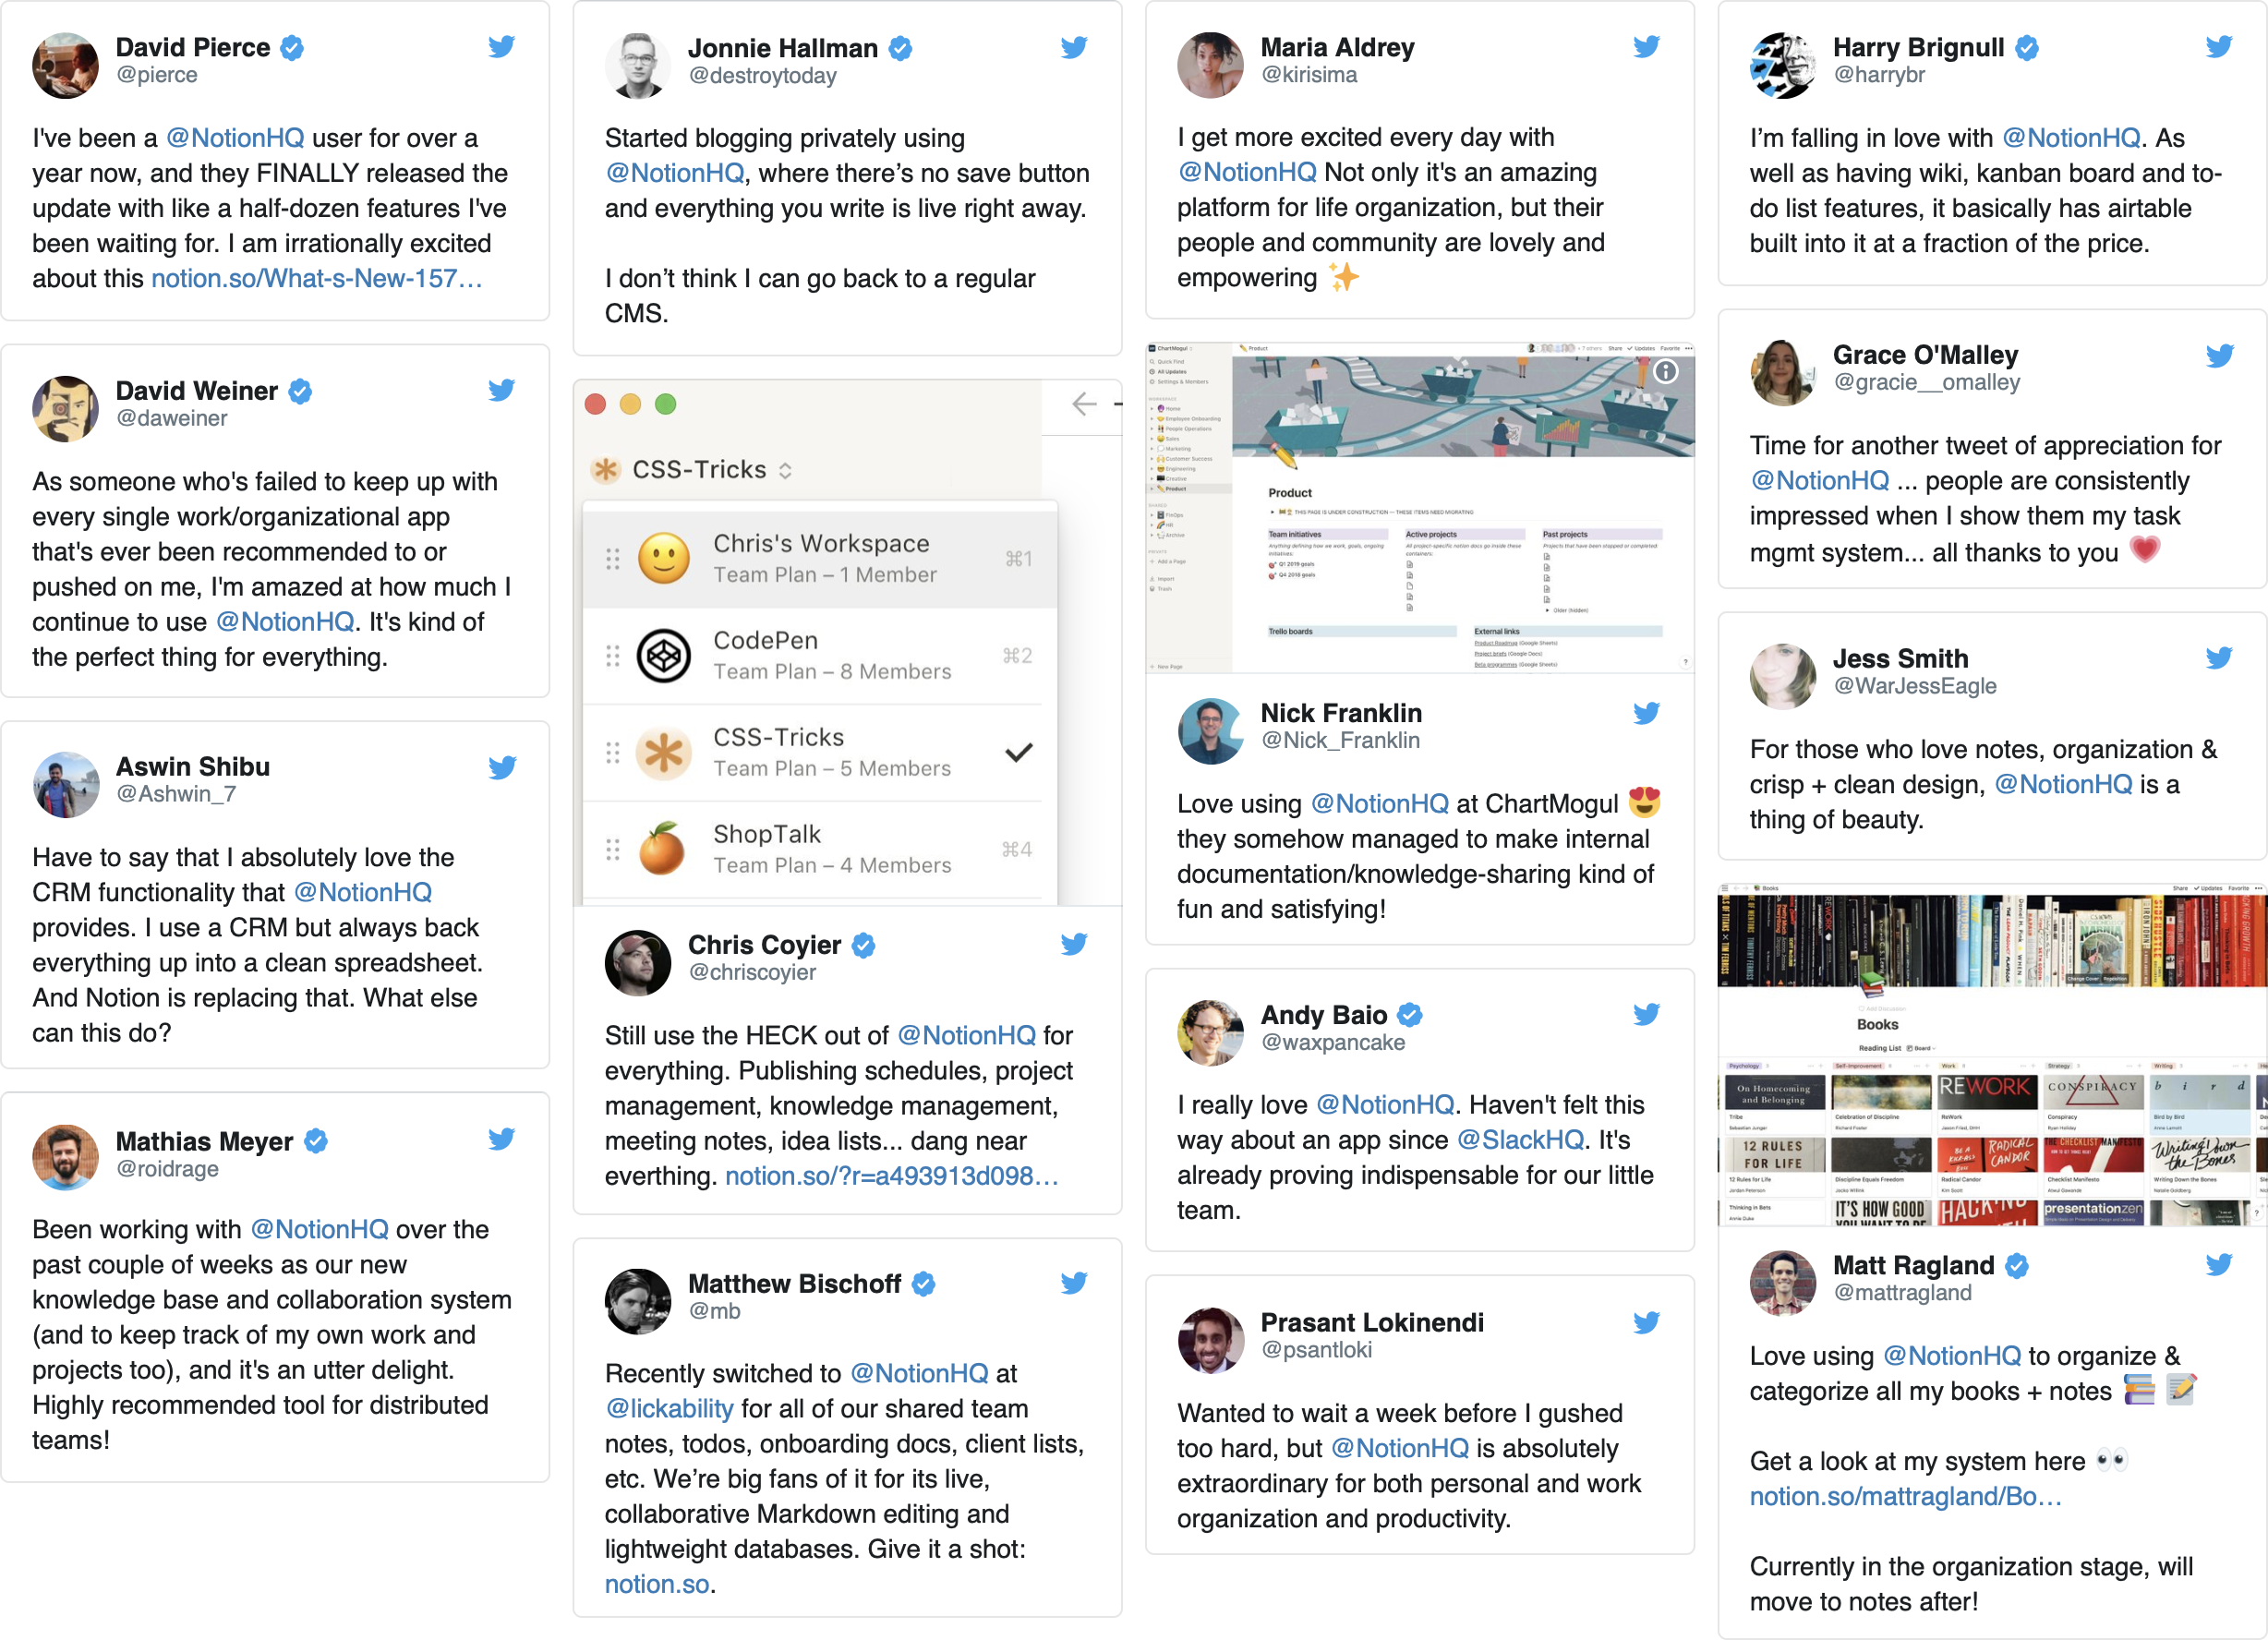 A collection of Tweets from users who like using Notion